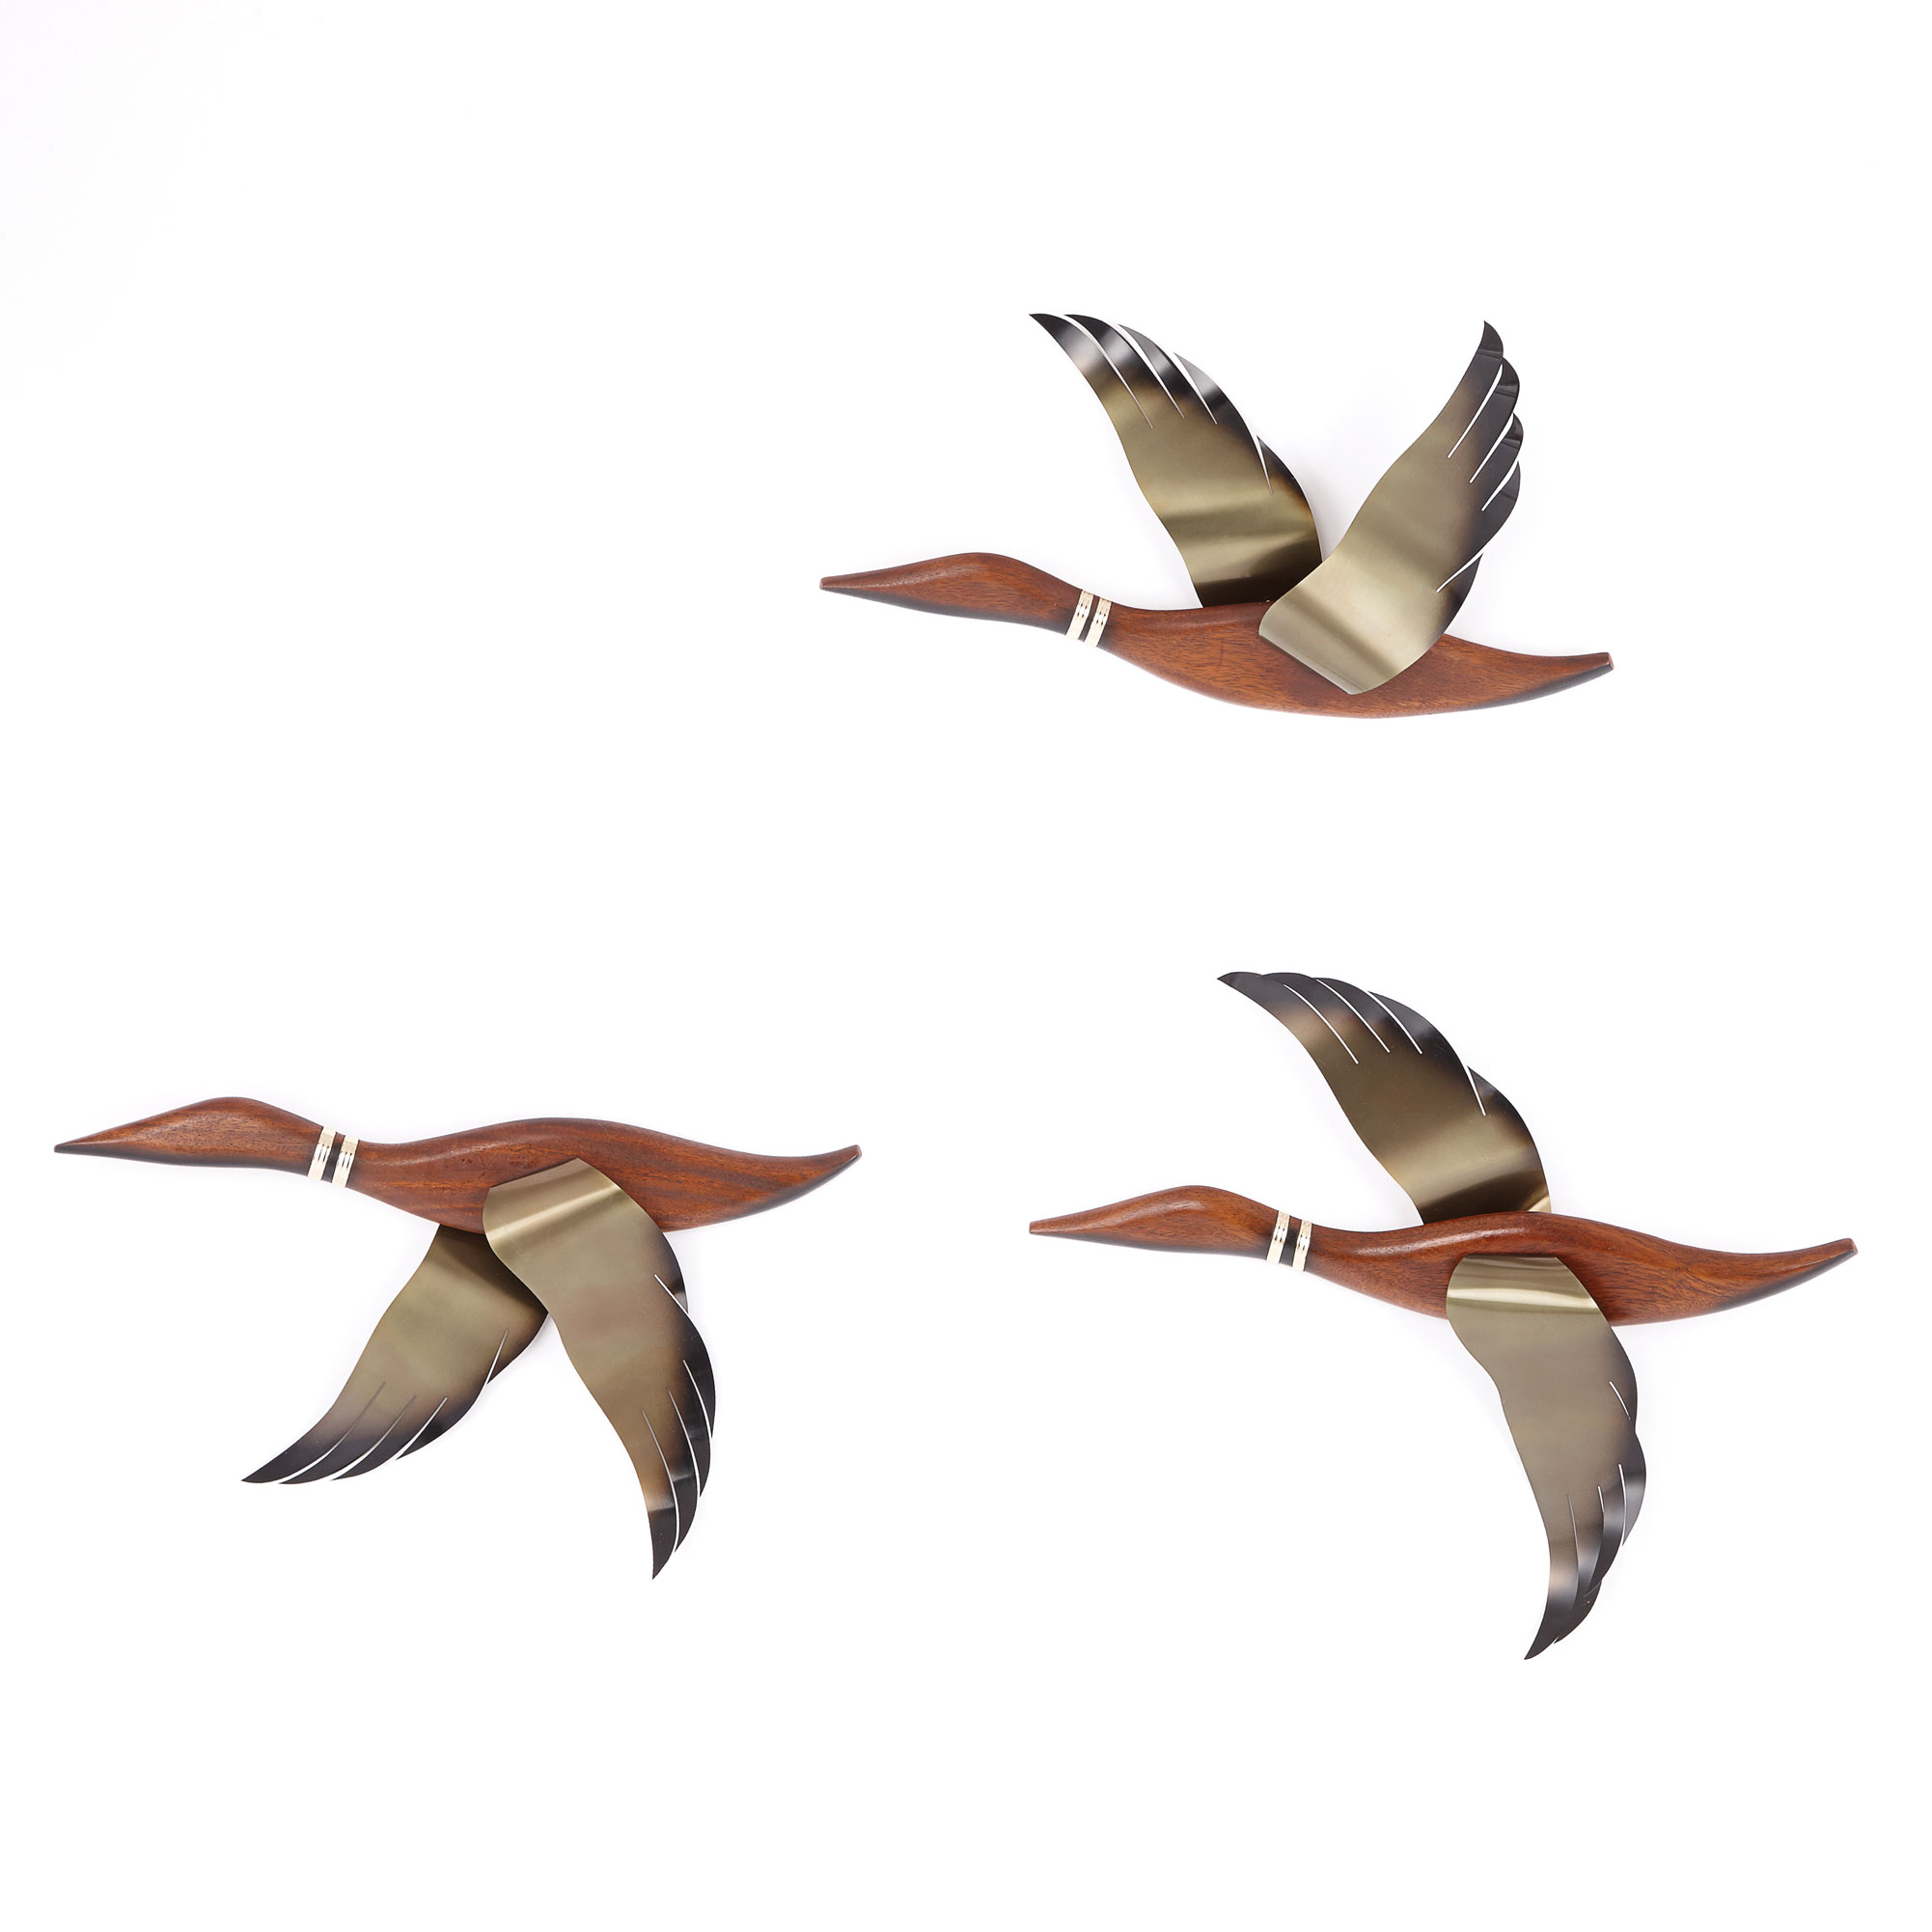 Three flying geese photo